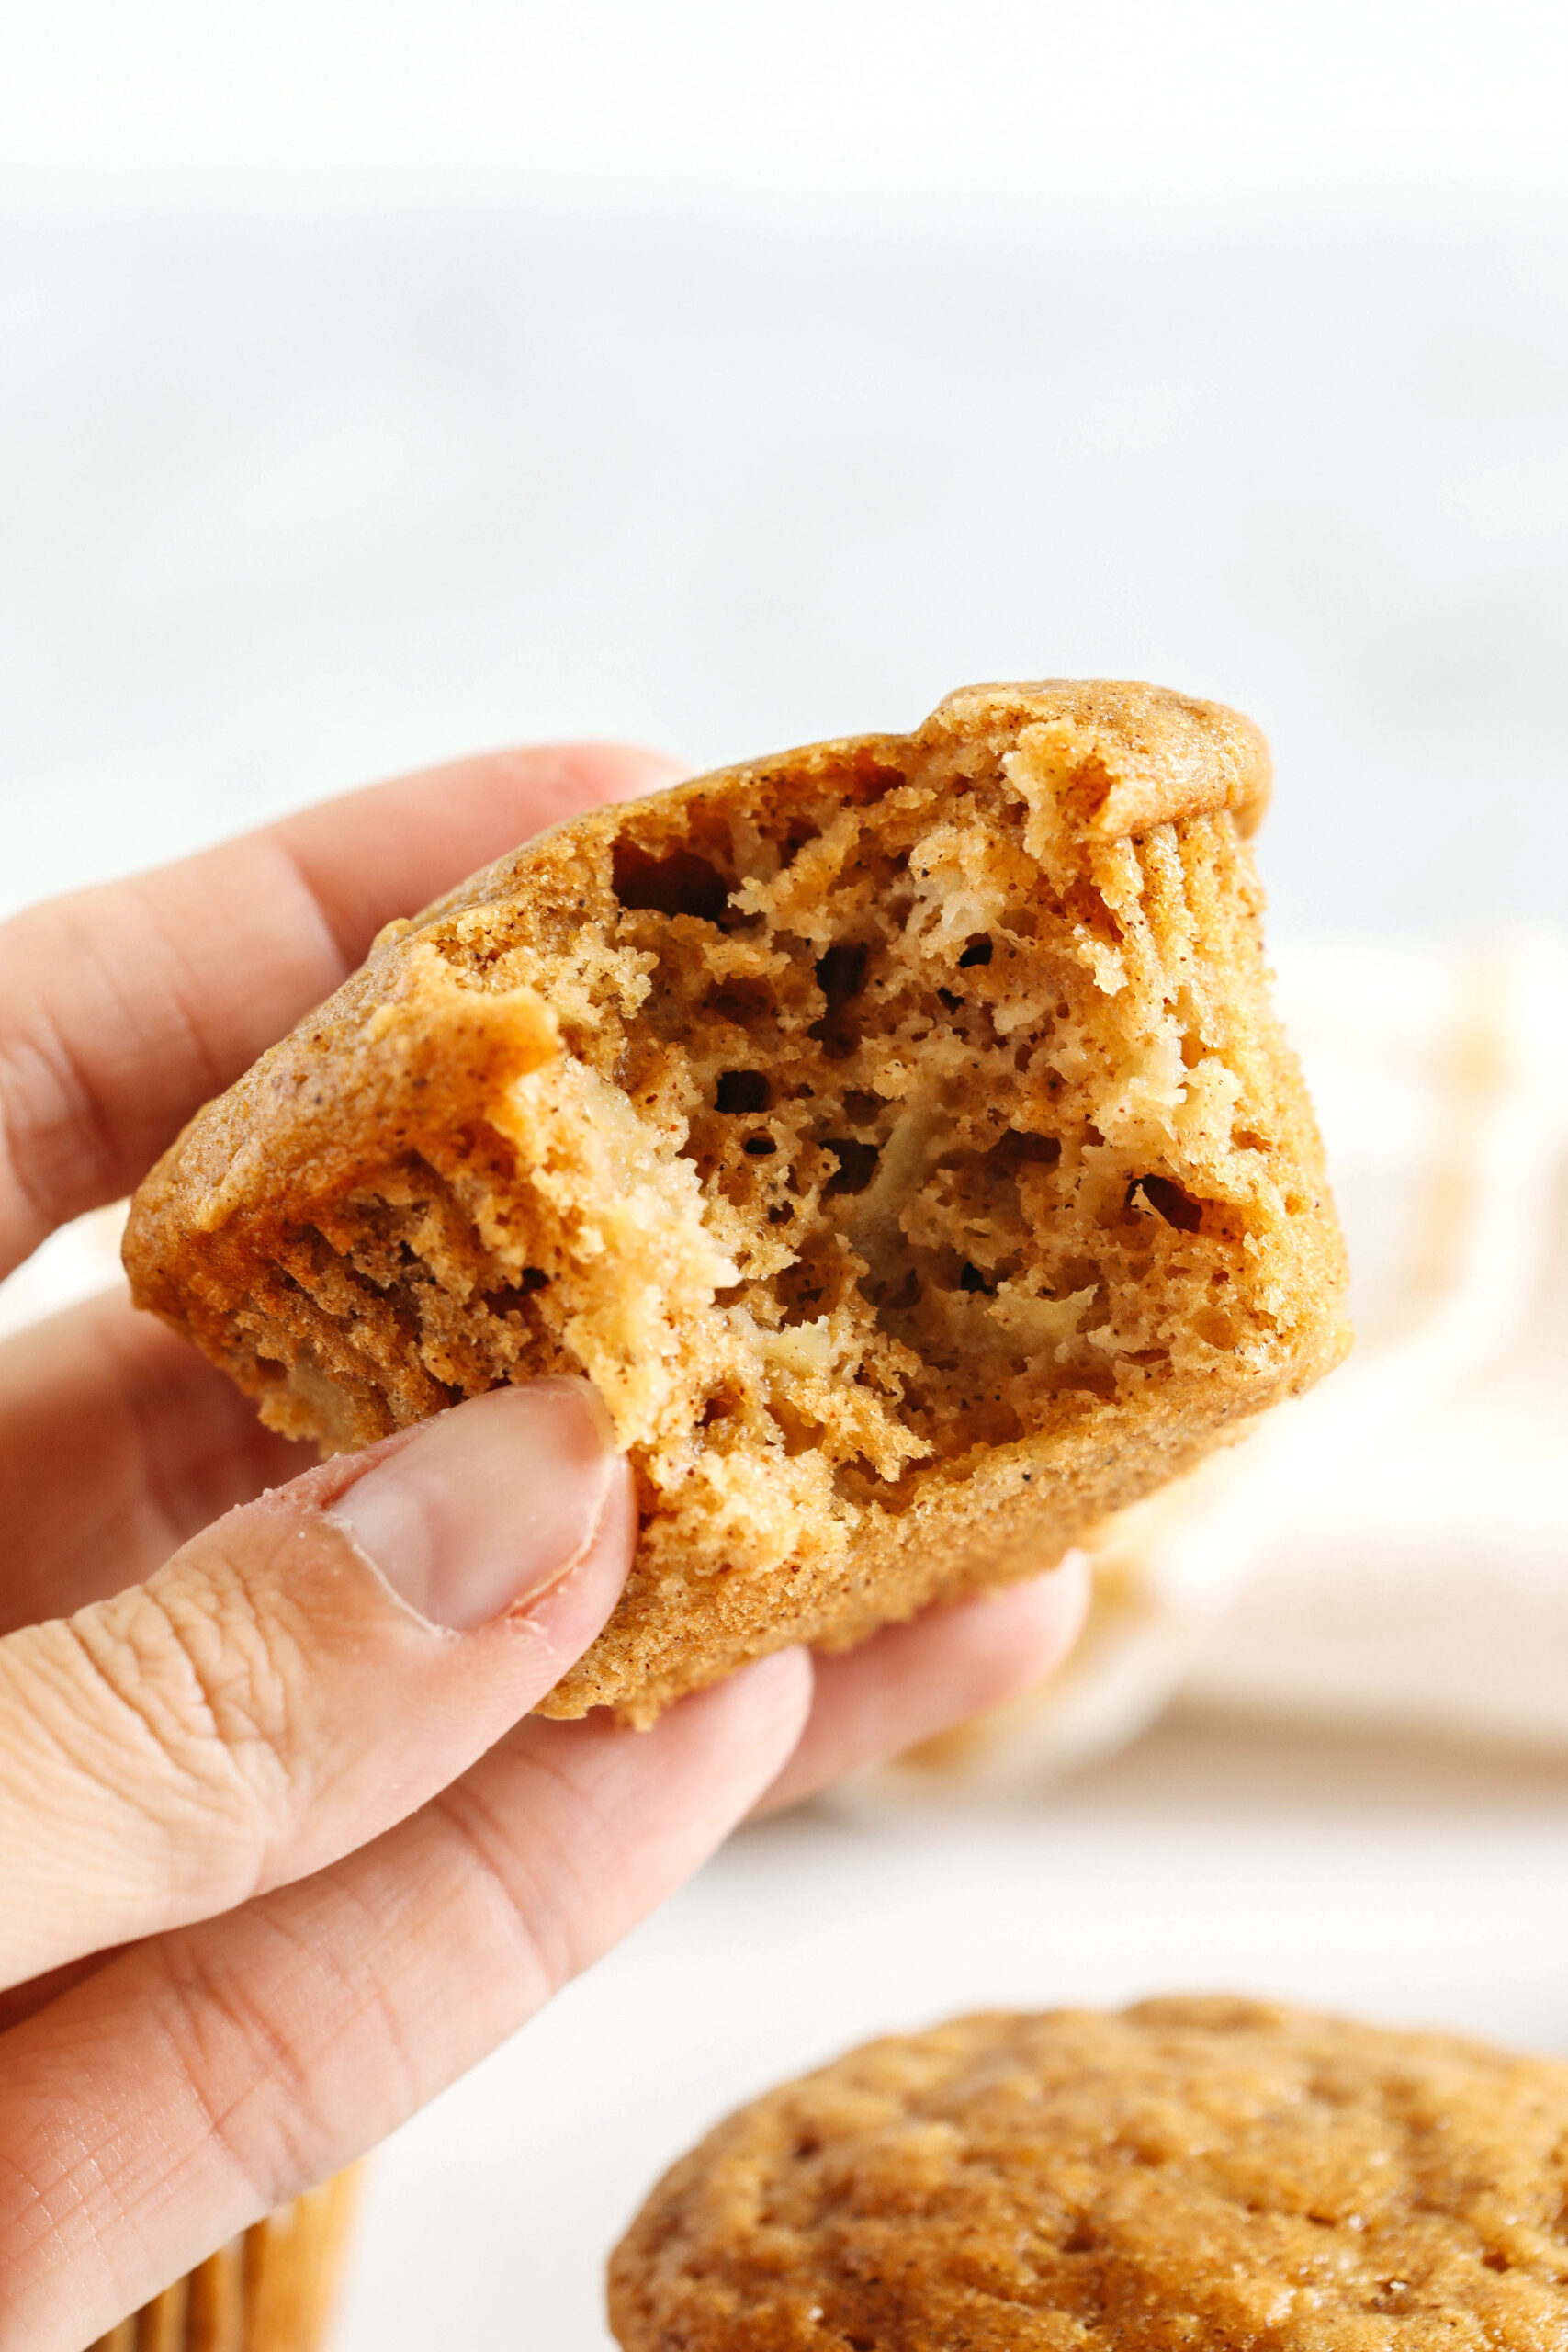 These Healthy Apple Cinnamon Muffins are moist, fluffy, and made healthier with whole wheat flour, Greek yogurt, and zero butter or refined sugar!  Loaded with delicious chunks of apple and warm spices for the perfect fall muffin!